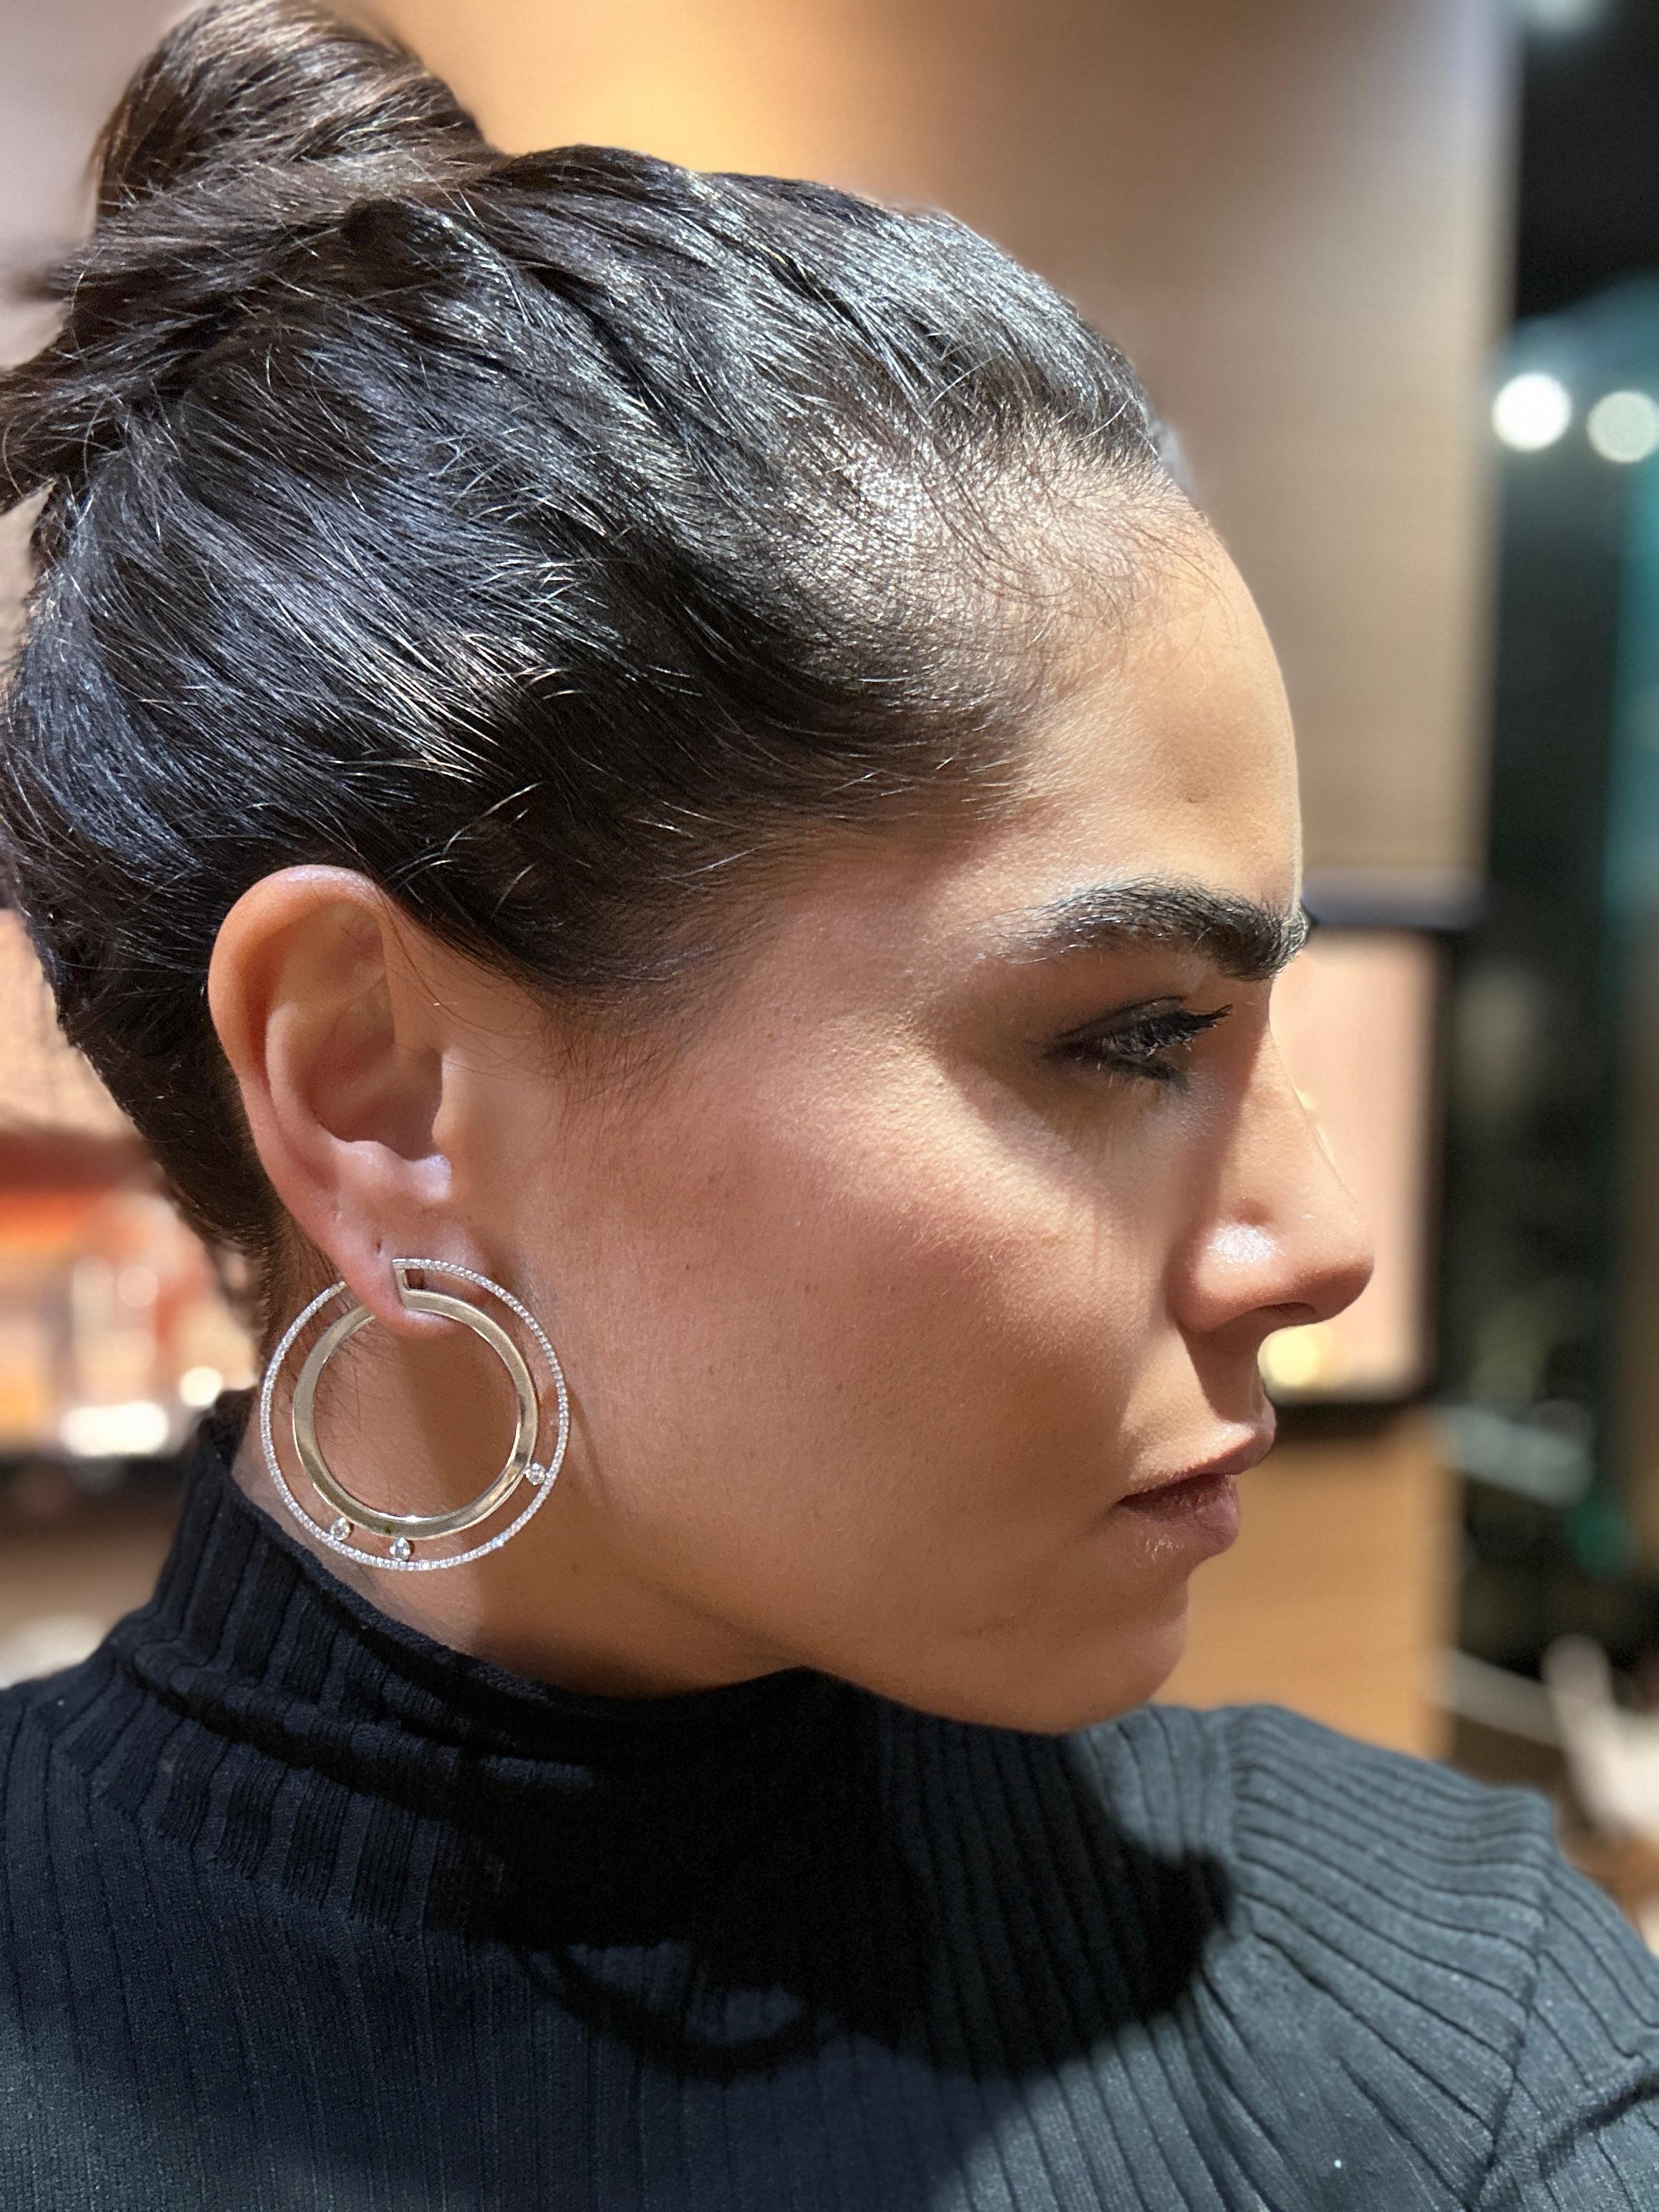 In a contemporary way, Messika combines the Move Romane model 18 carat white gold rings with diamonds threads and three moving diamonds to make the hoops elegant and modern. These large white gold hoop diamond earrings will perfectly place